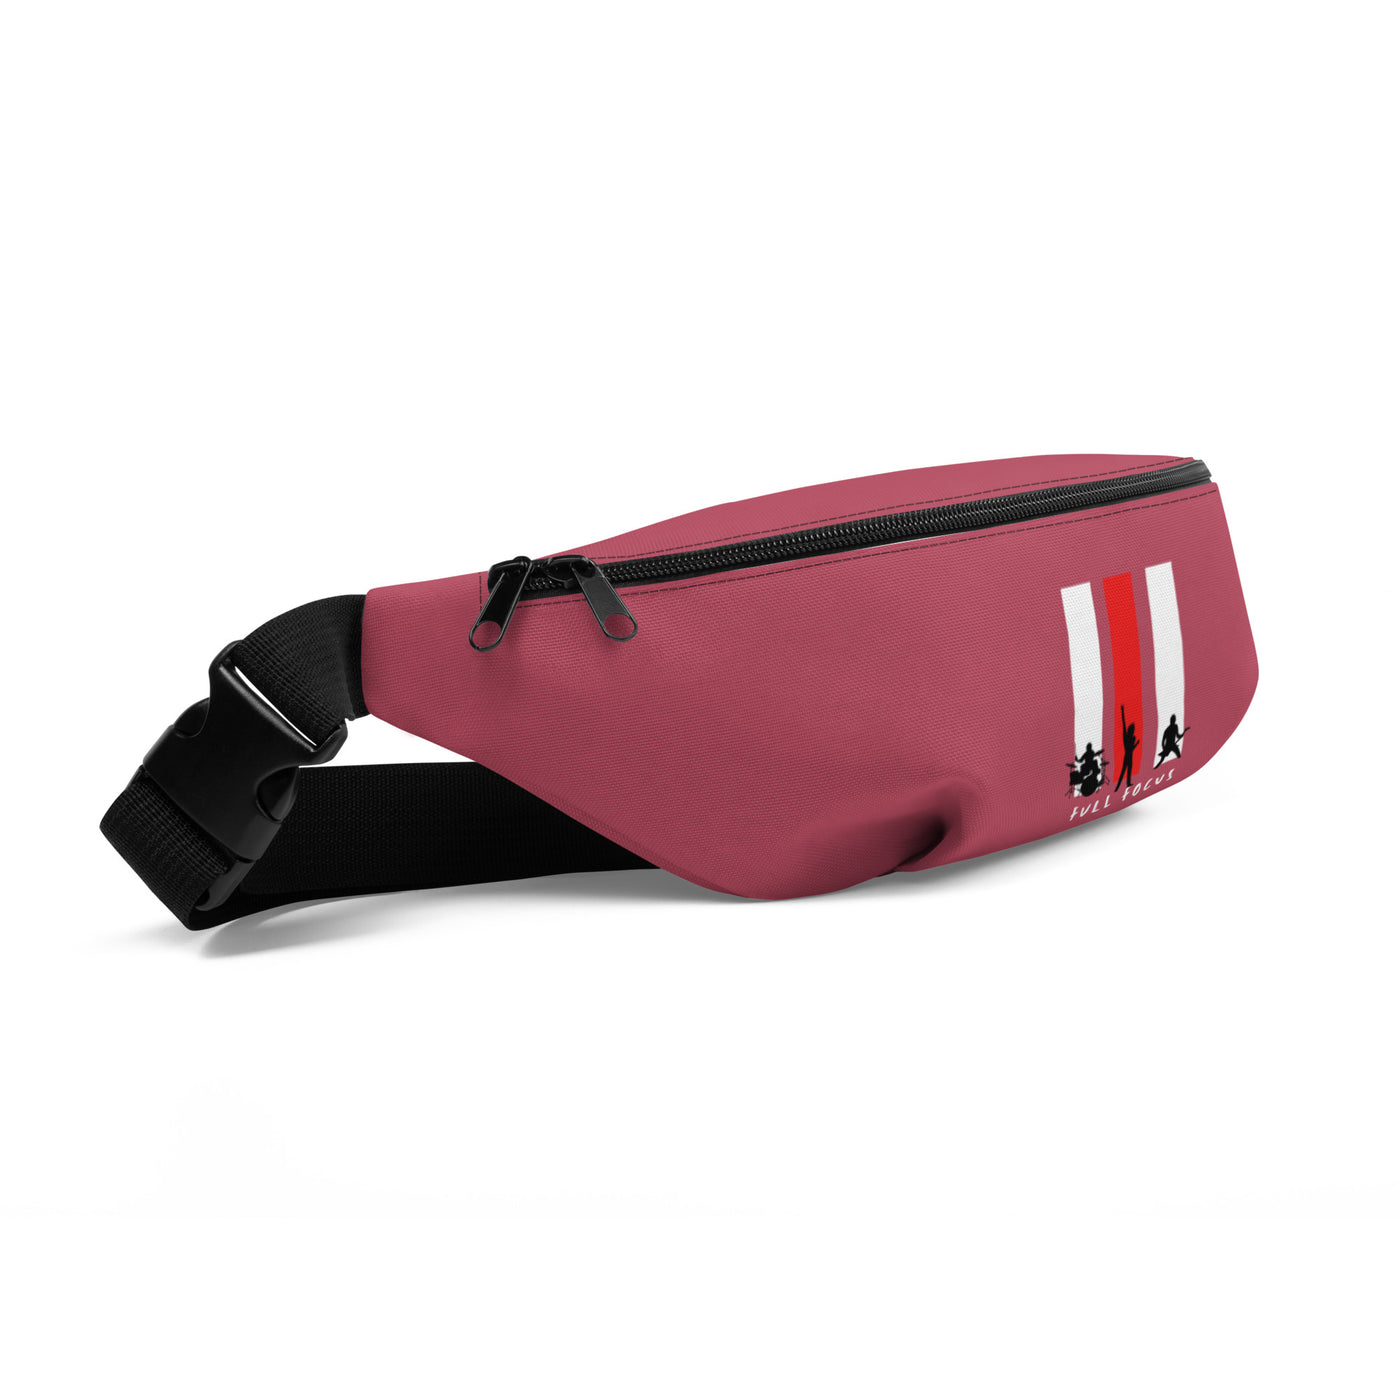 Hippie Pink Fanny Pack - Full Focus